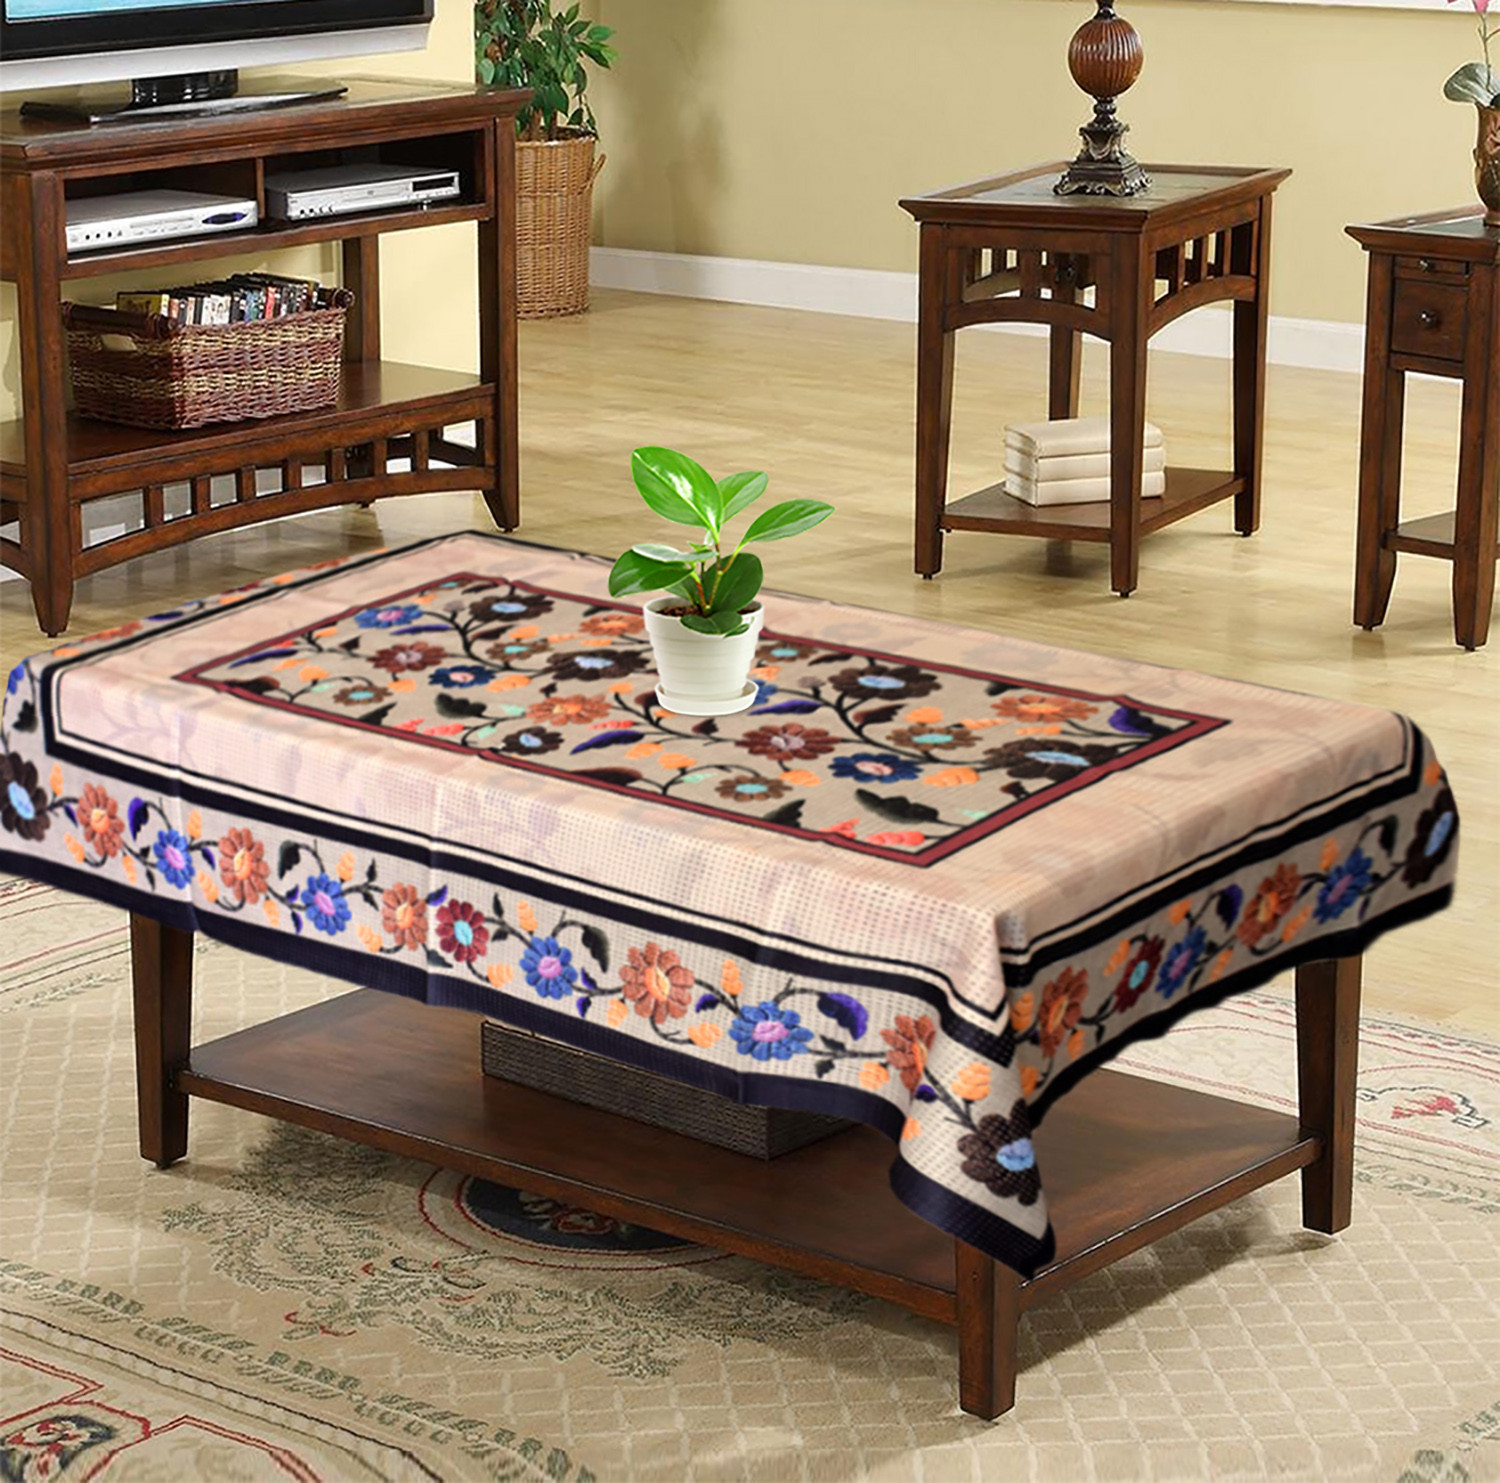 Kuber Industries Flower Printed Cotton 4 Seater Center Table Cover- 40